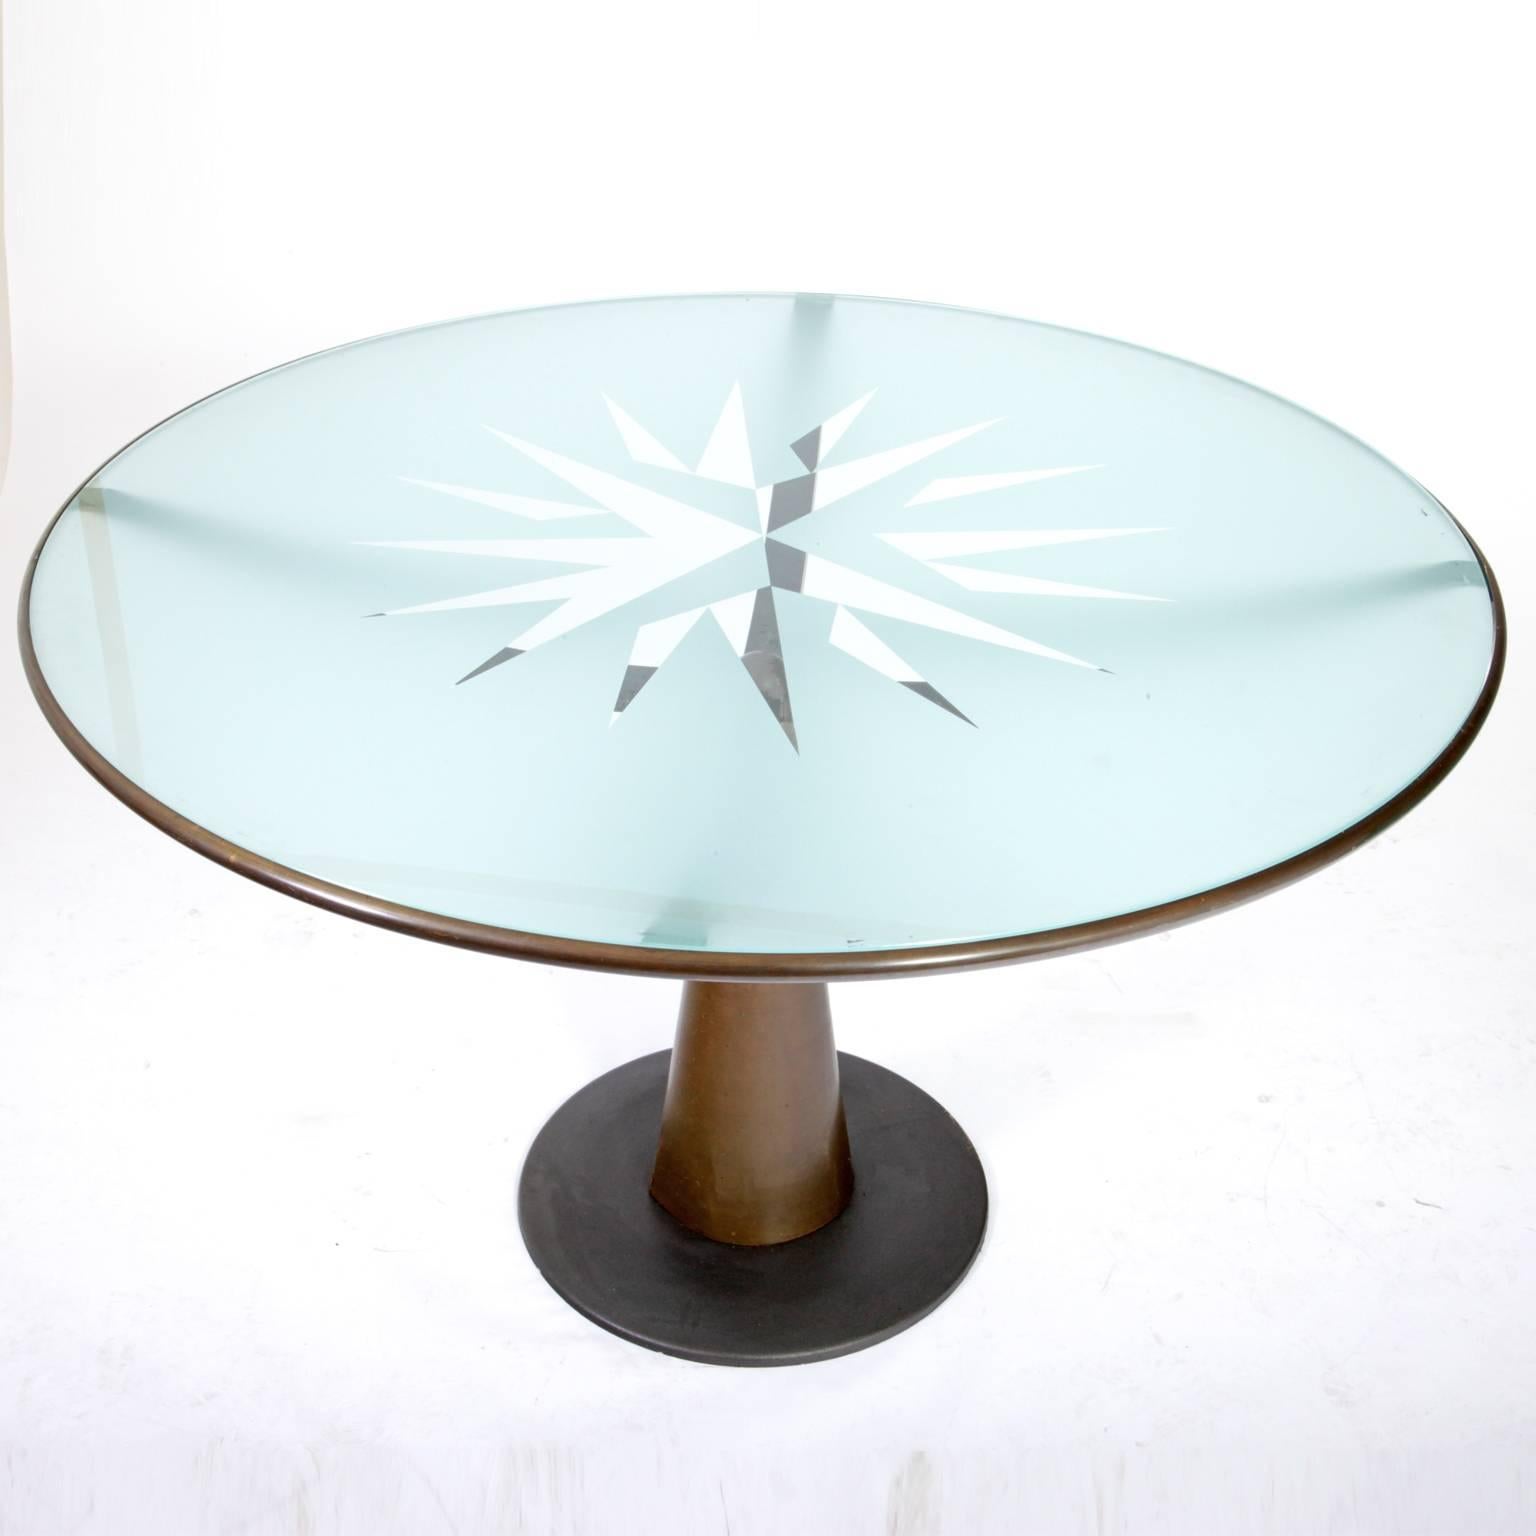 Round table by the Catalan designer Oscar Tusquets for Aleph. The Stand is made out of bronze, the glass top is matted, except for the star-shape in its centre. The table is signed "Aleph by Tusquets". The bronze has small cracks at the